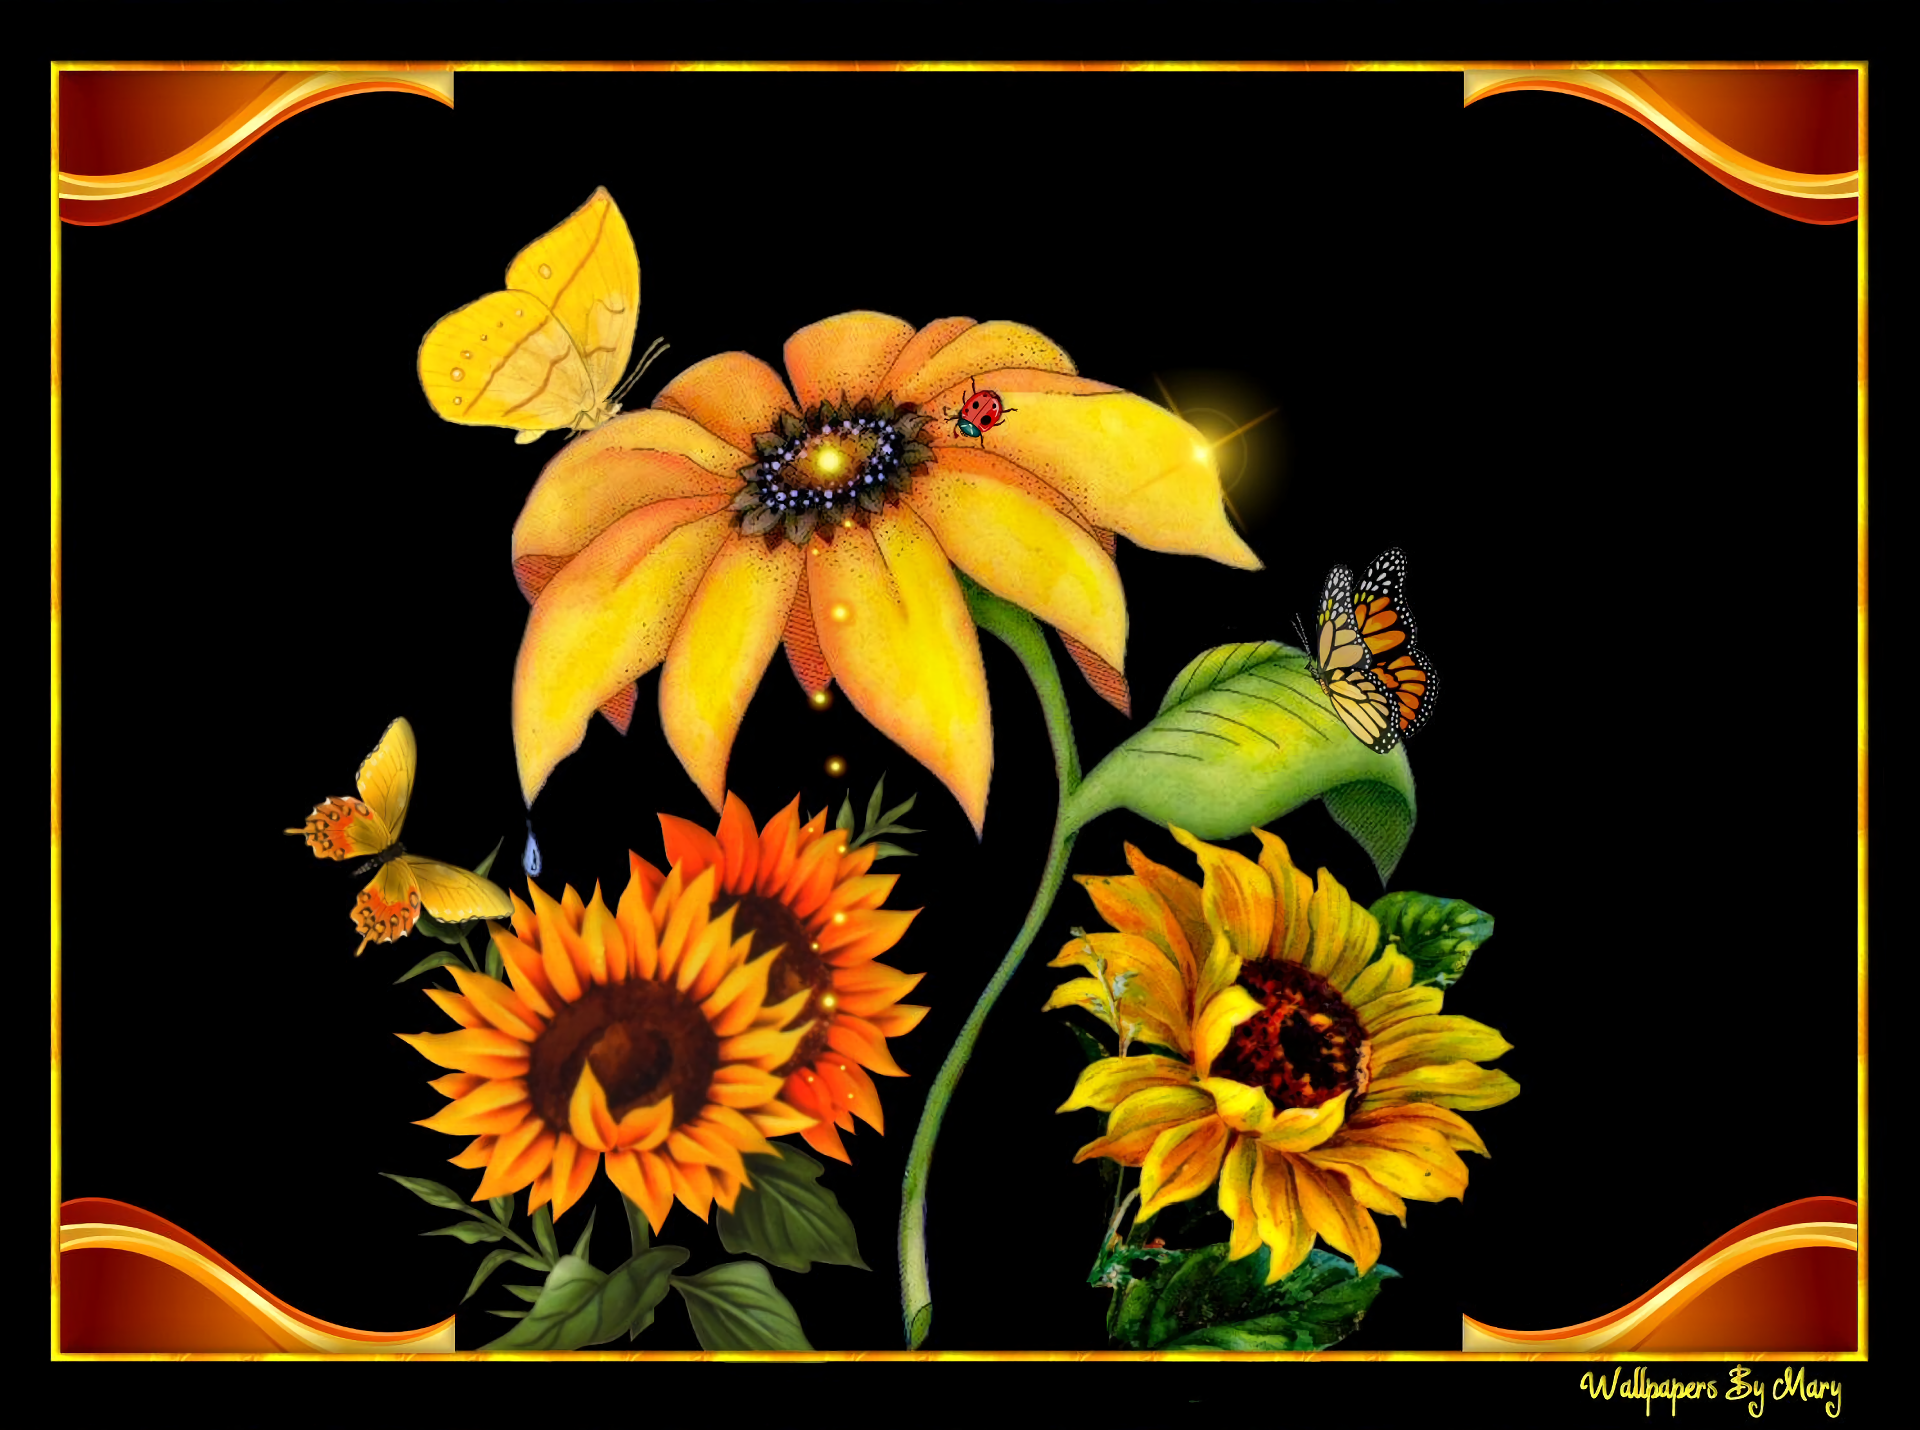 1920x1430 Sunflowers and Butterflies Wallpaper Background Image. 